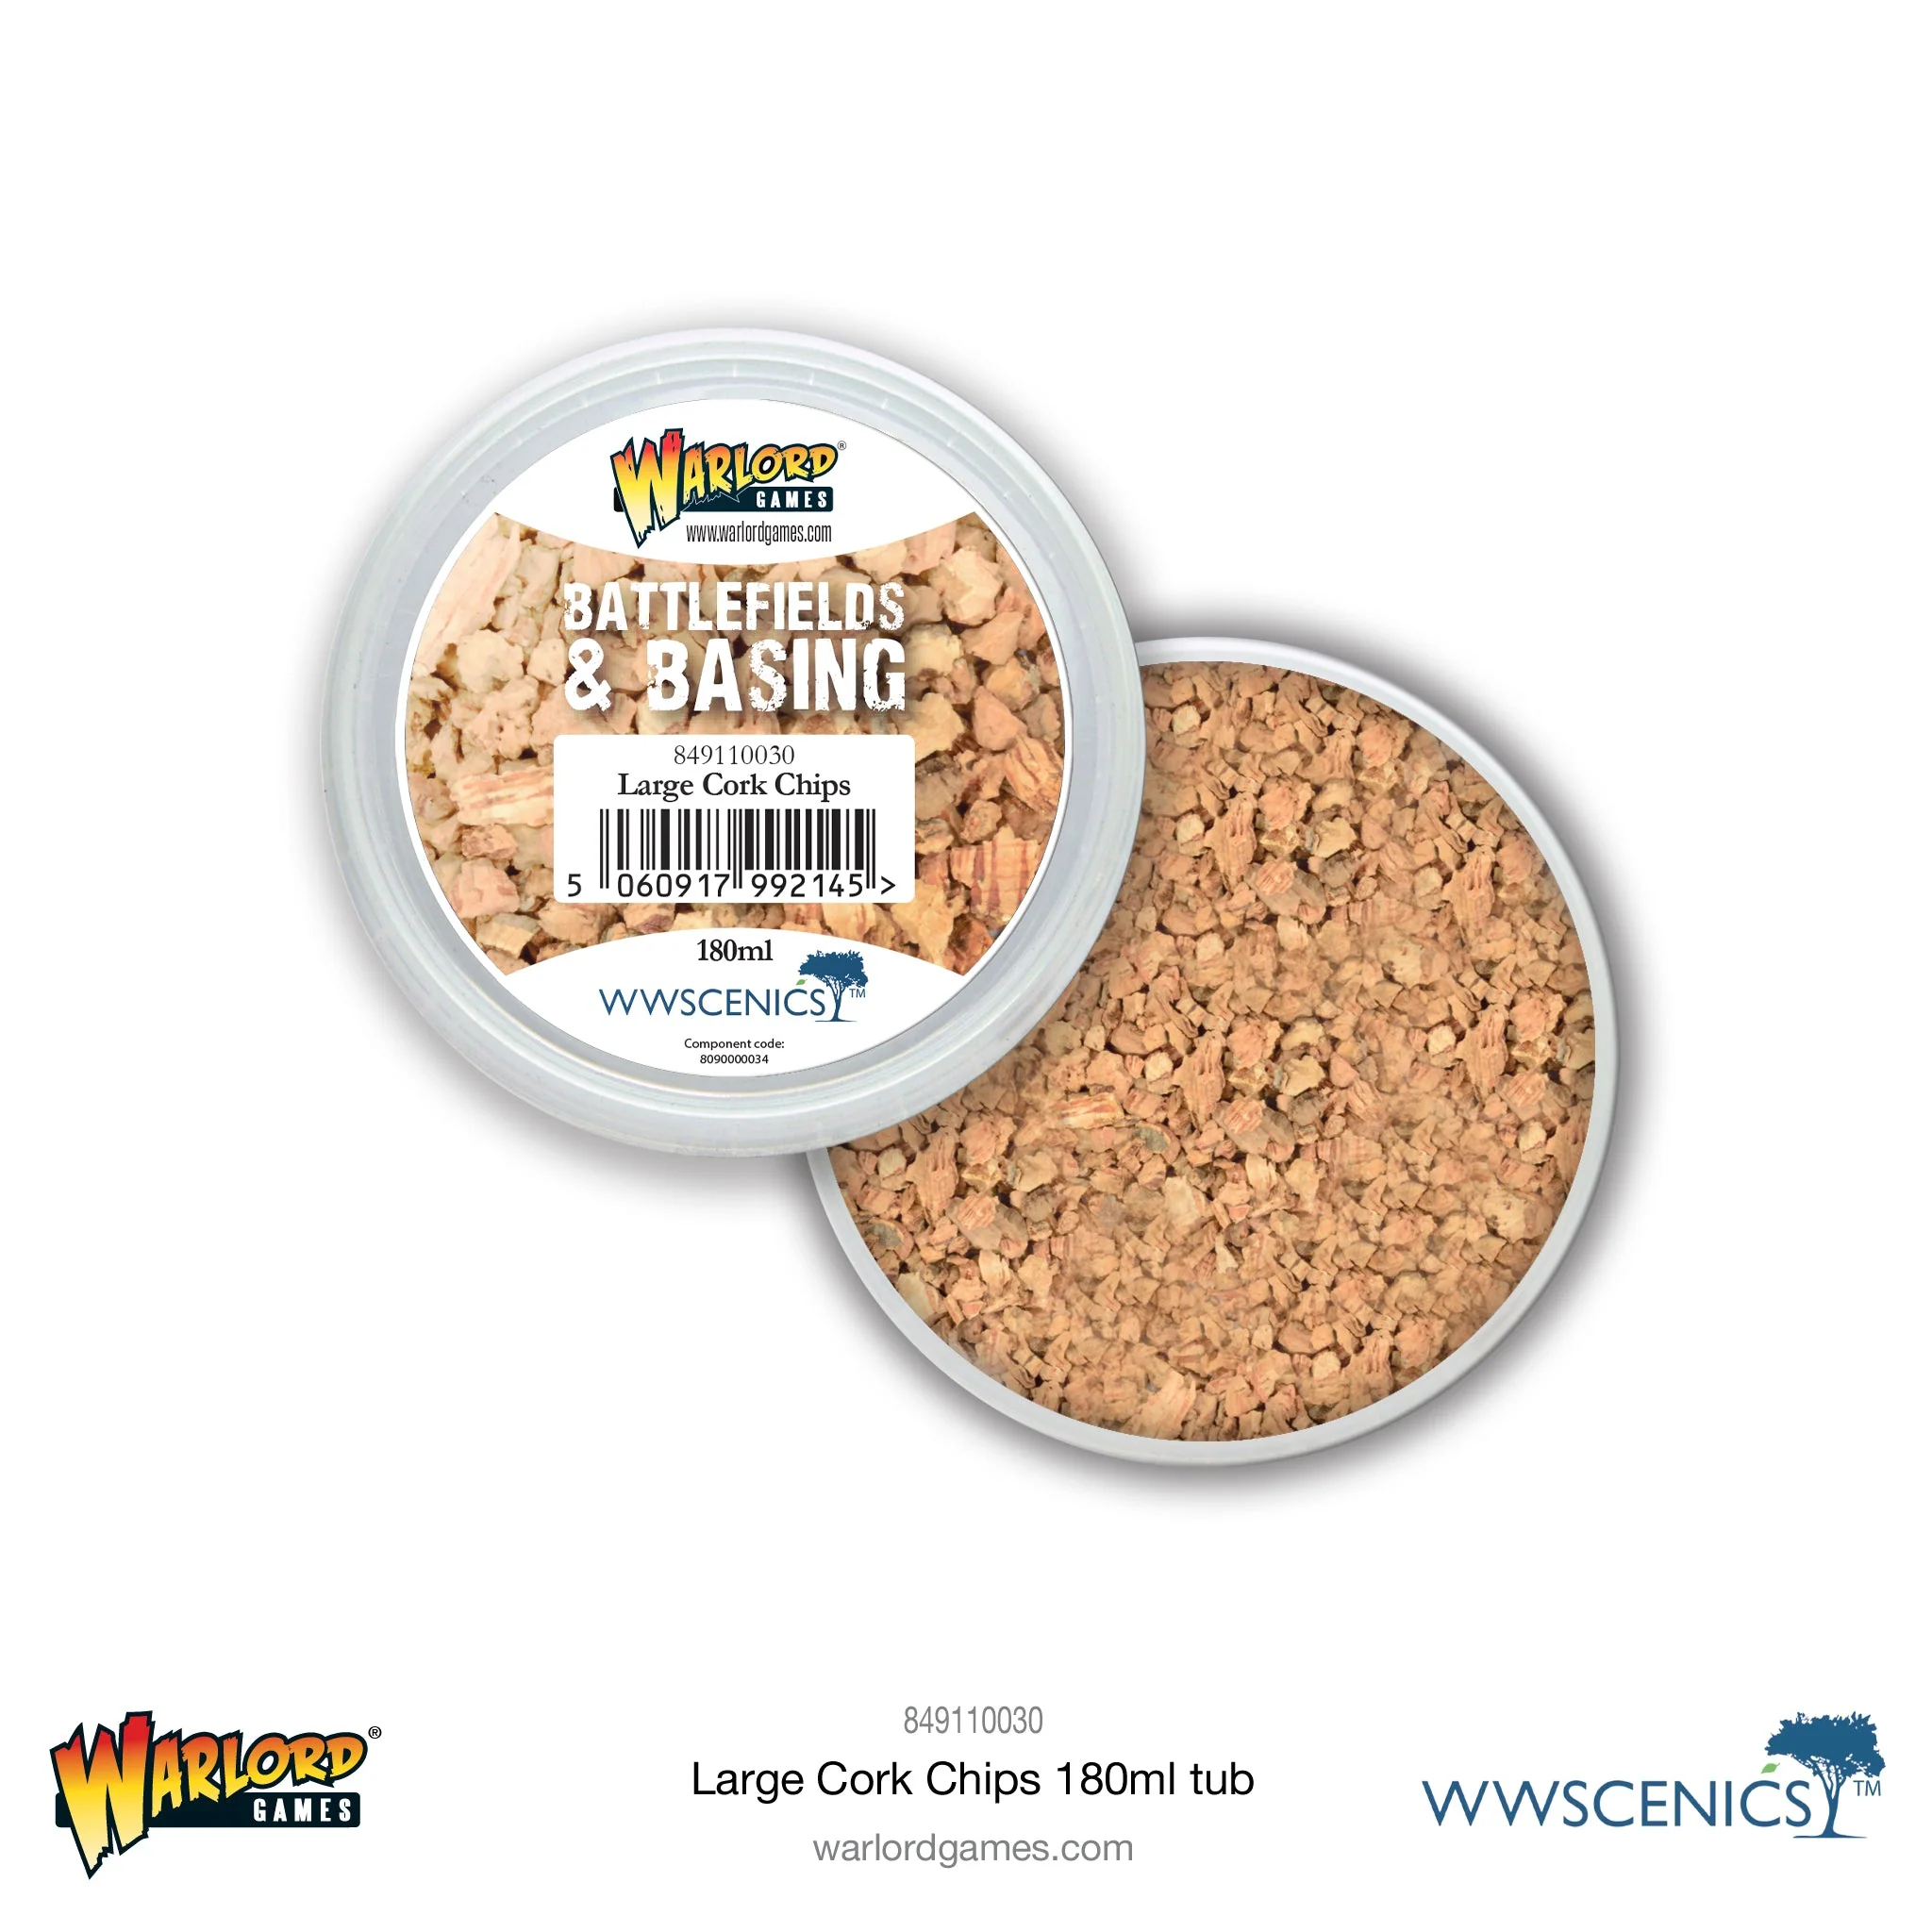 Warlord Games: Battlefields & Basing: Large Cork Chips (180ml) 